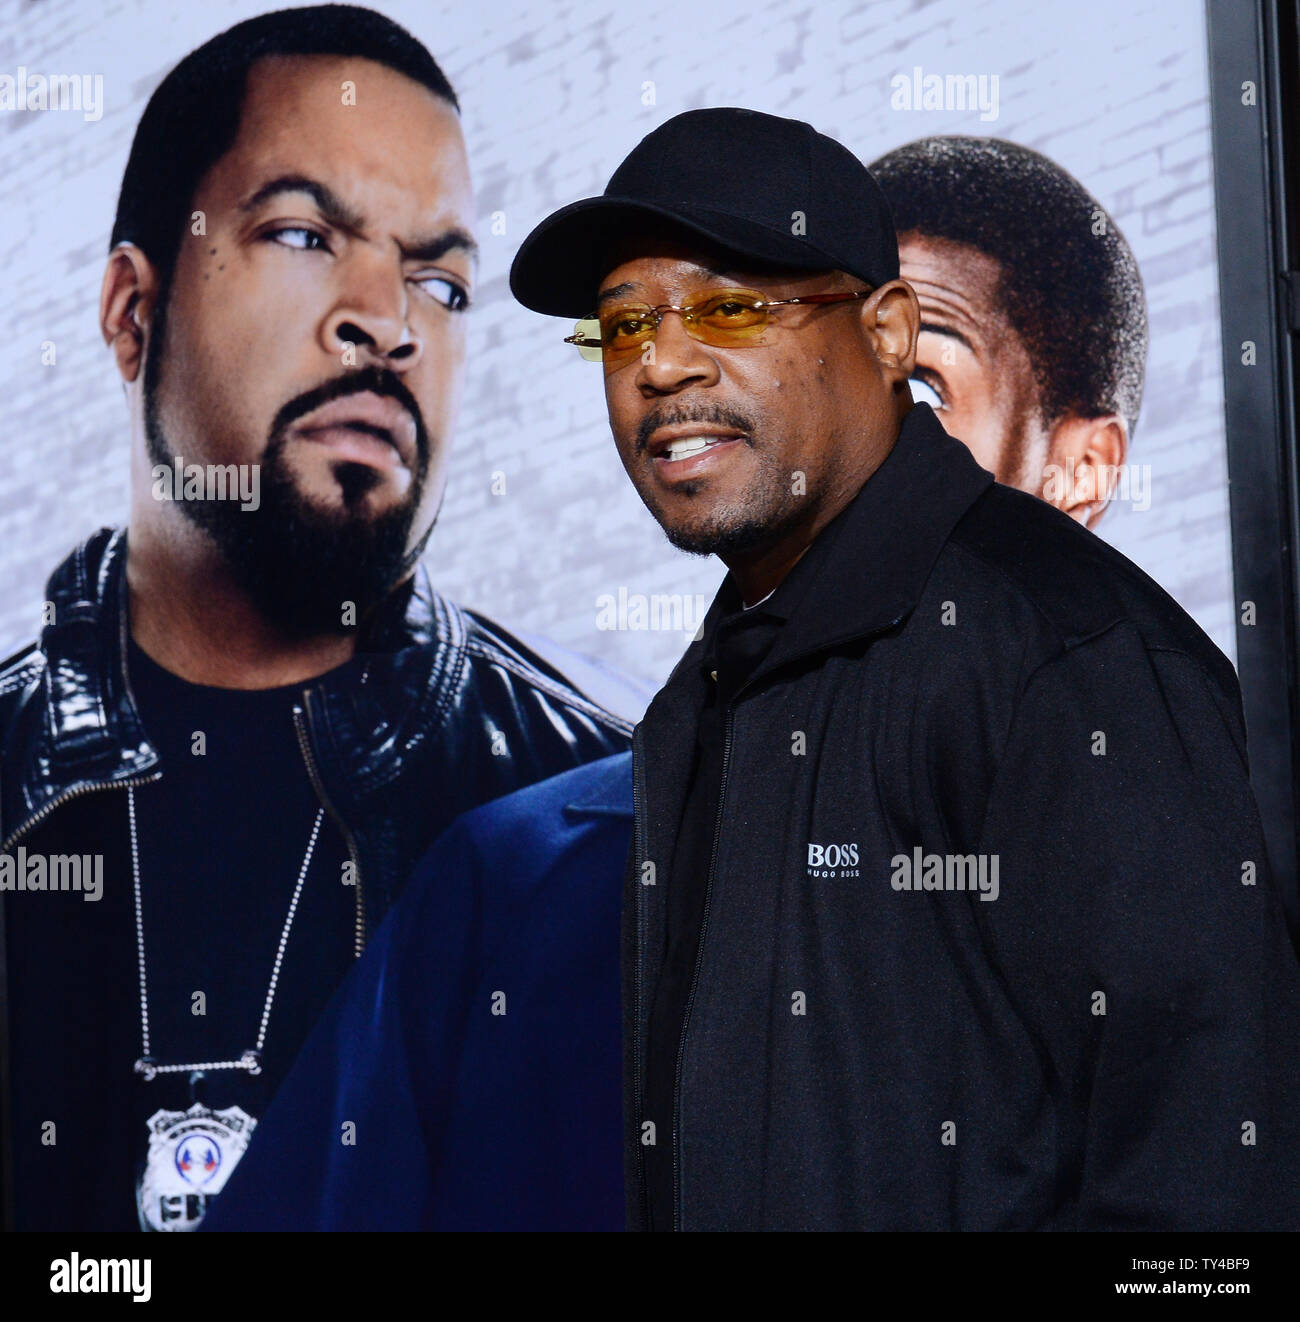 Actor Martin Lawrence attends the premiere of the motion picture comedy "Ride Along" at TCL Chinese Theatre in the Hollywood section of Los Angeles on January 13, 2014. In the film, fast-talking security guard Ben (Kevin Hart) joins his cop brother-in-law James (Ice Cube) on a 24-hour patrol of Atlanta in order to prove himself worthy of marrying Angela (Tika Sumpter), James' sister.   UPI/Jim Ruymen Stock Photo